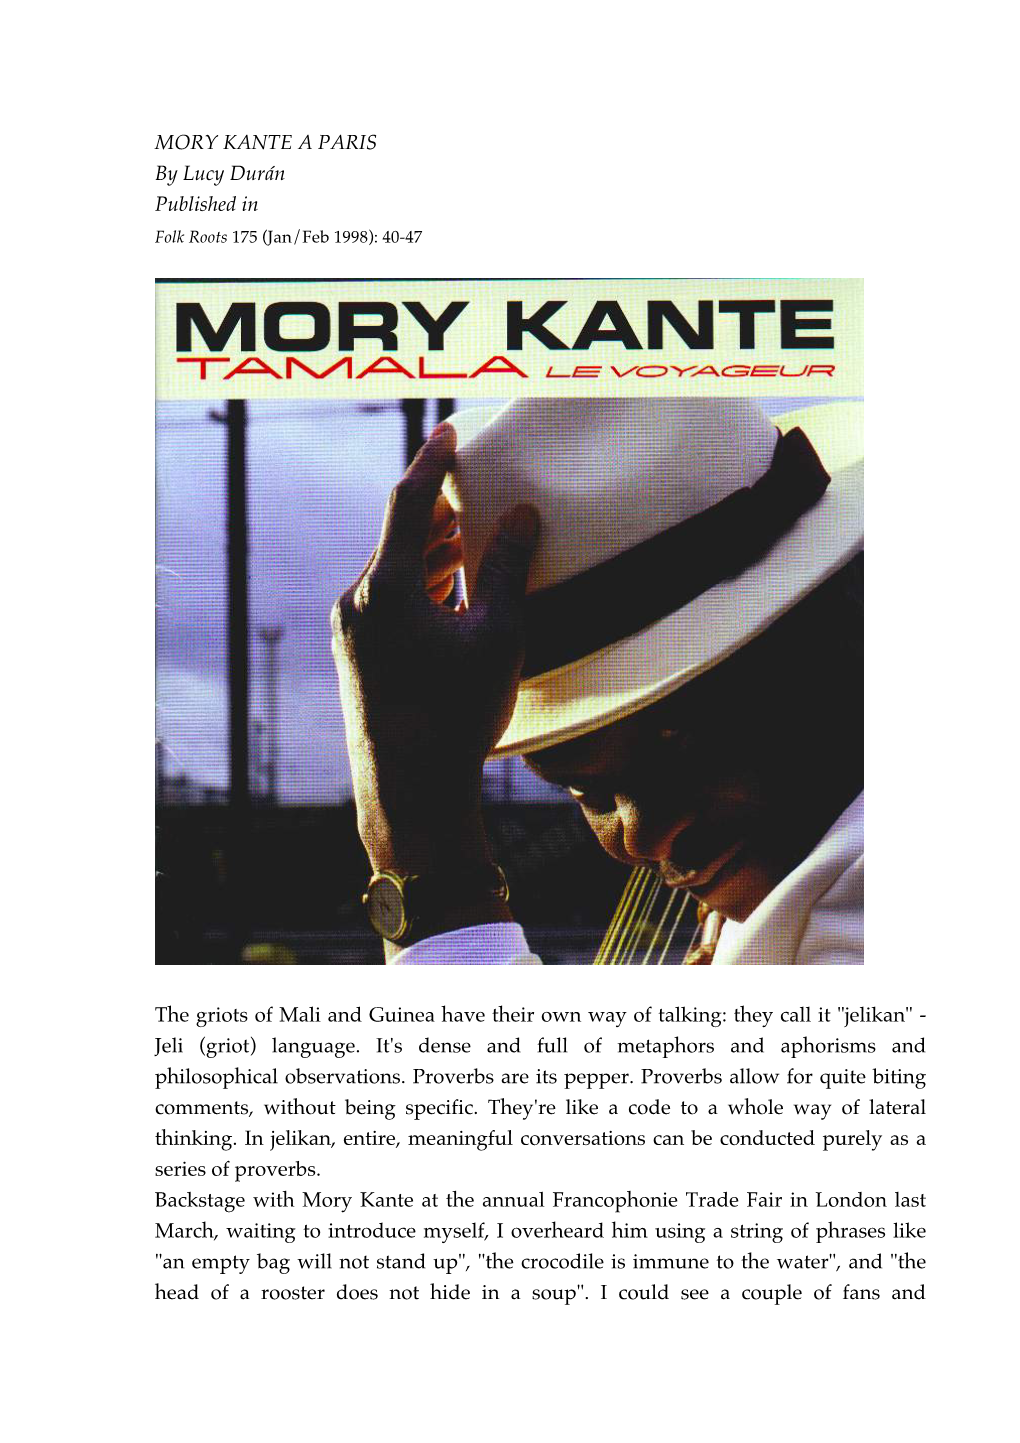 MORY KANTE a PARIS by Lucy Durán Published in the Griots Of